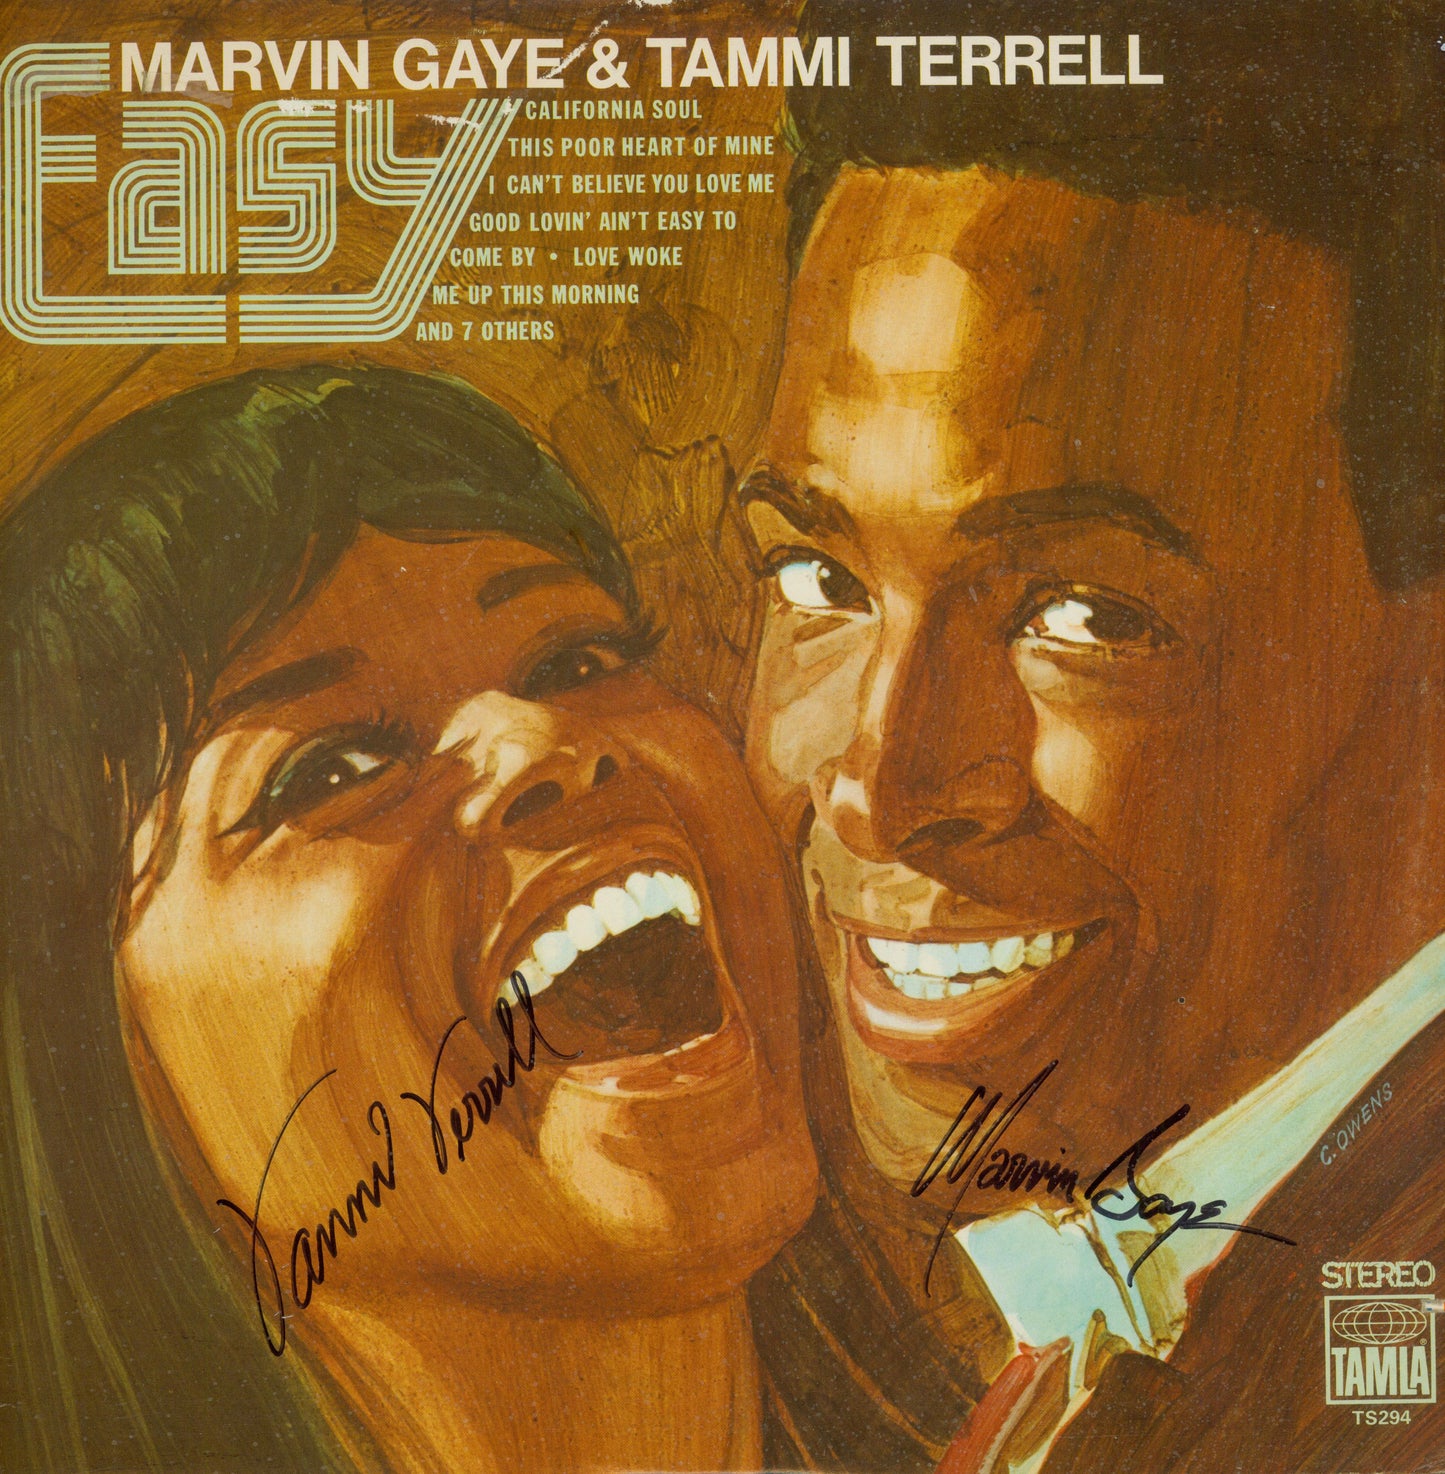 Marvin Gaye & Tammi Terrill Autographed LP - Zion Graphic Collectibles